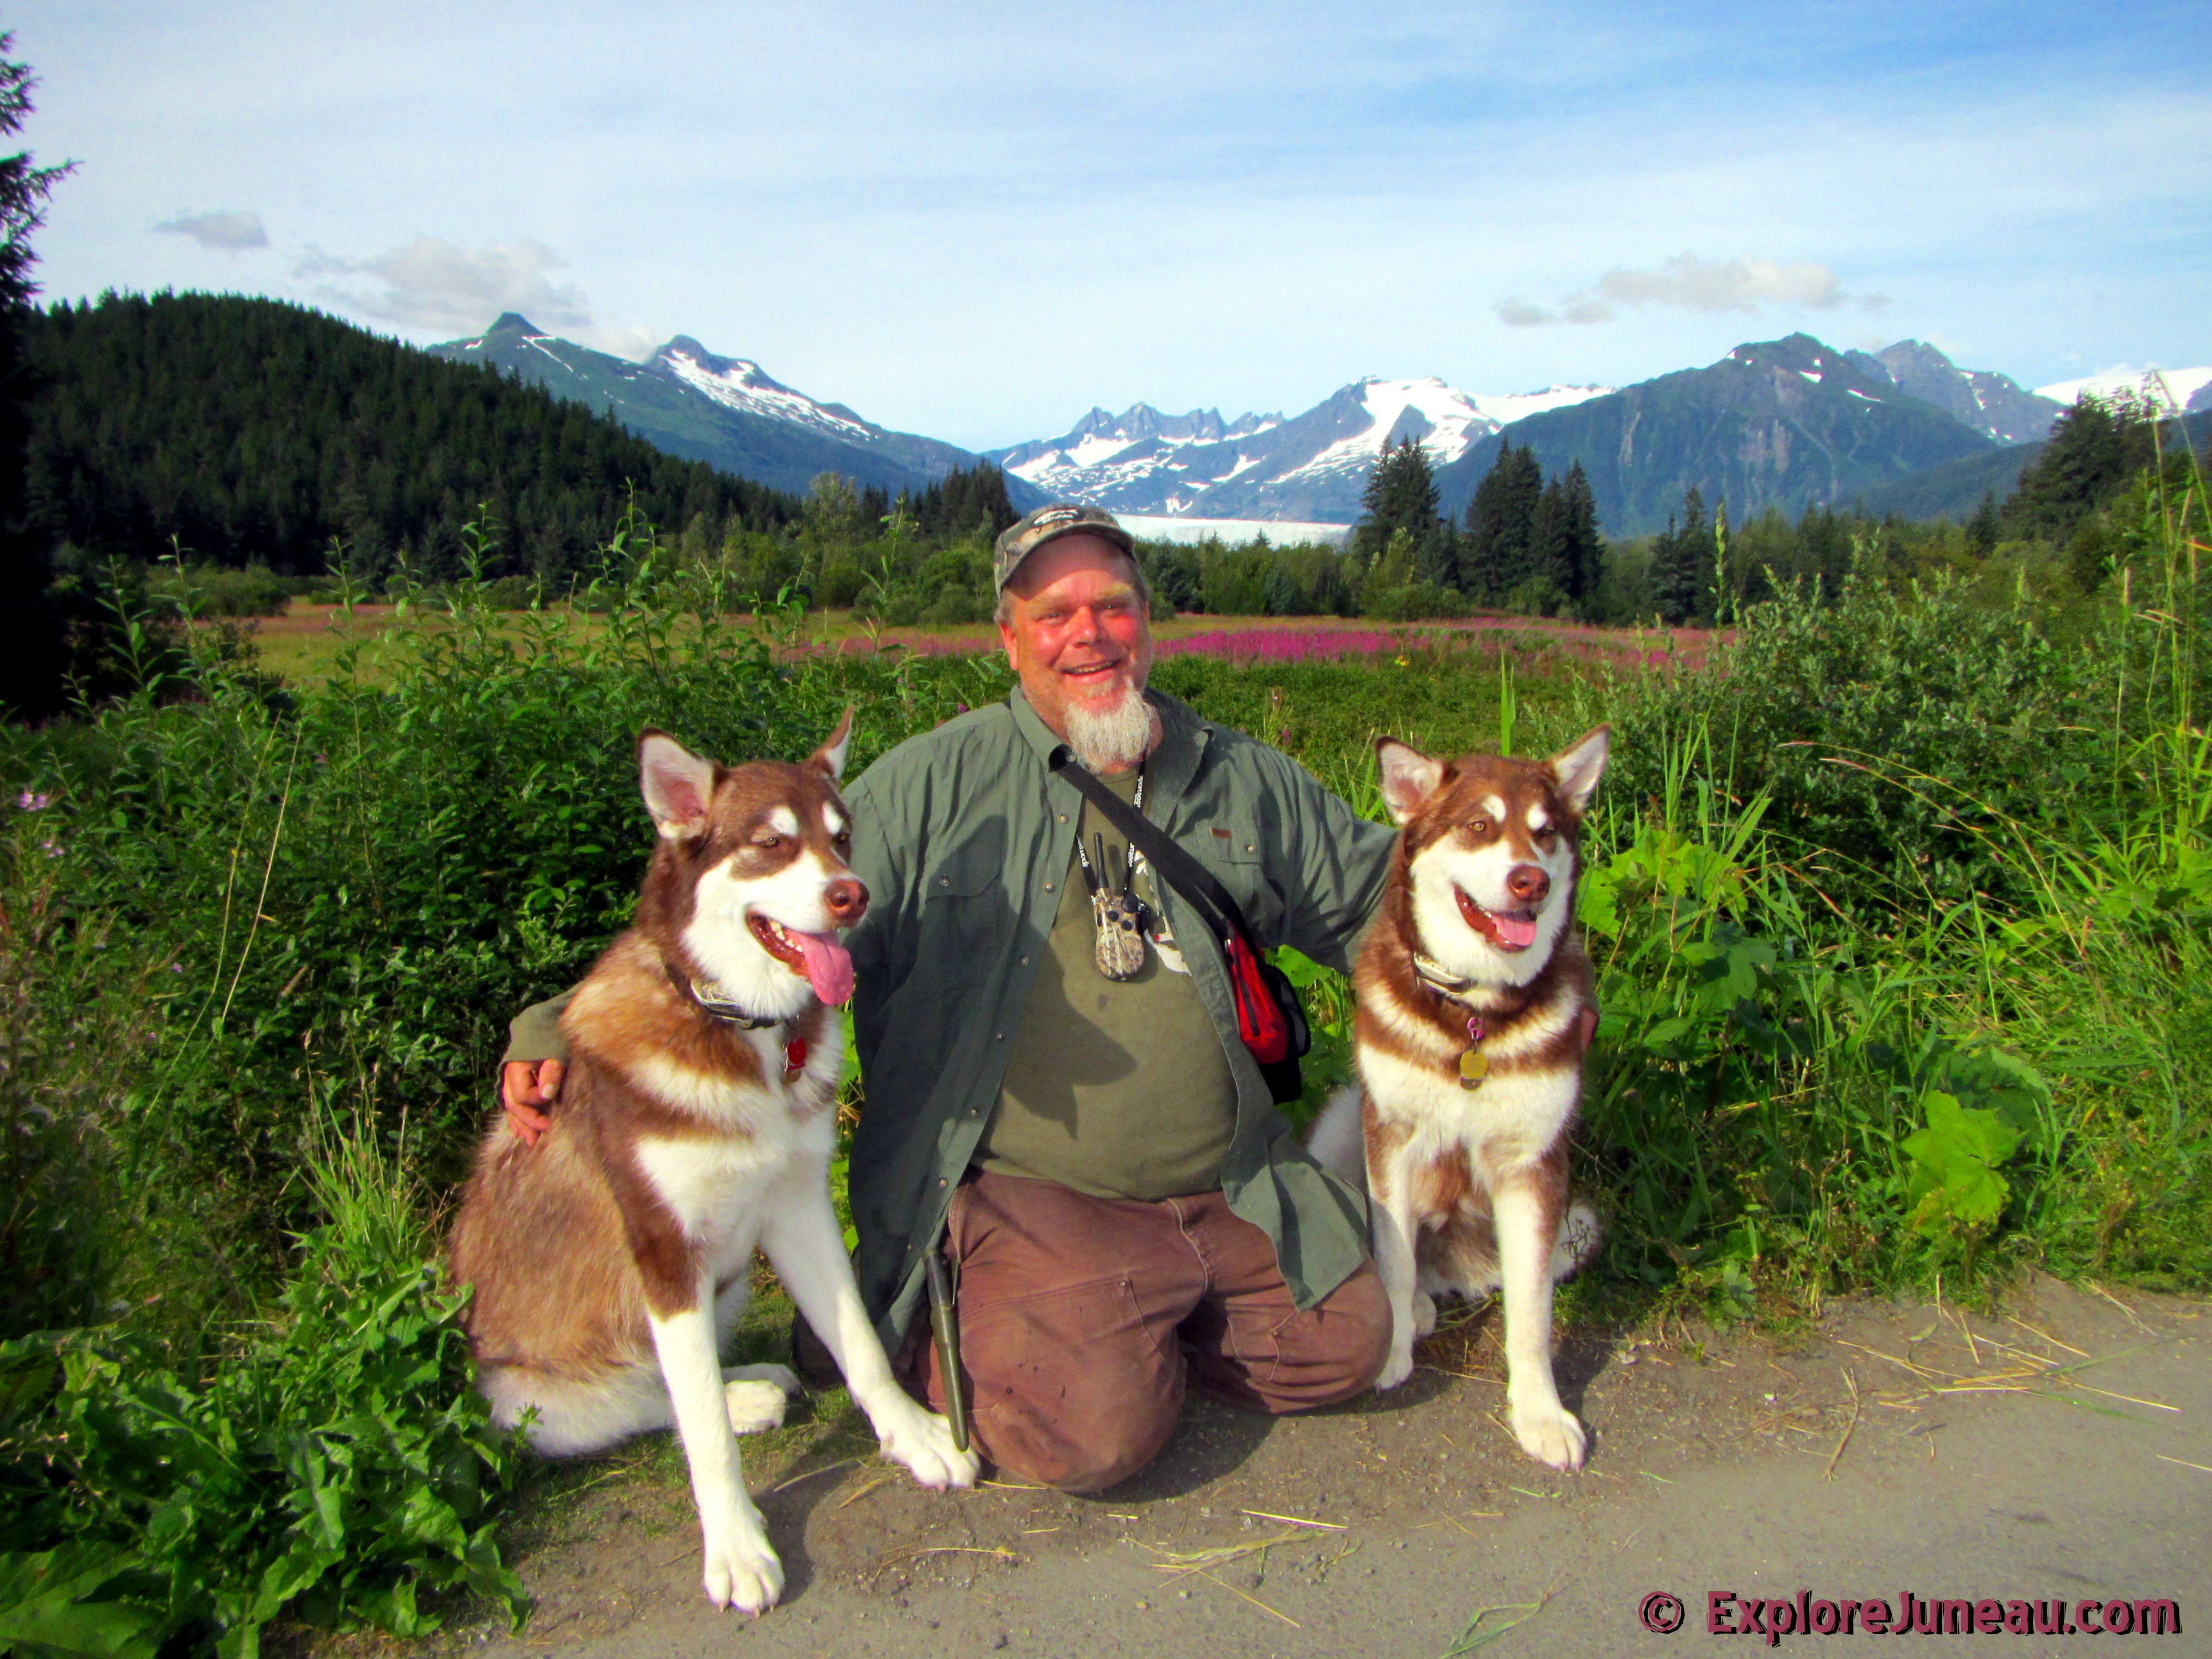 Sweet as Fireweed Honey a safe place to enjoy wanderlust adventures of the heart together and in Love. Skadi & Freya with Russell Josh Peterson @ Brotherhood Bridge Juneau Alaska. Thank you for your Kindness & Support. Please Click Like on all the photos!